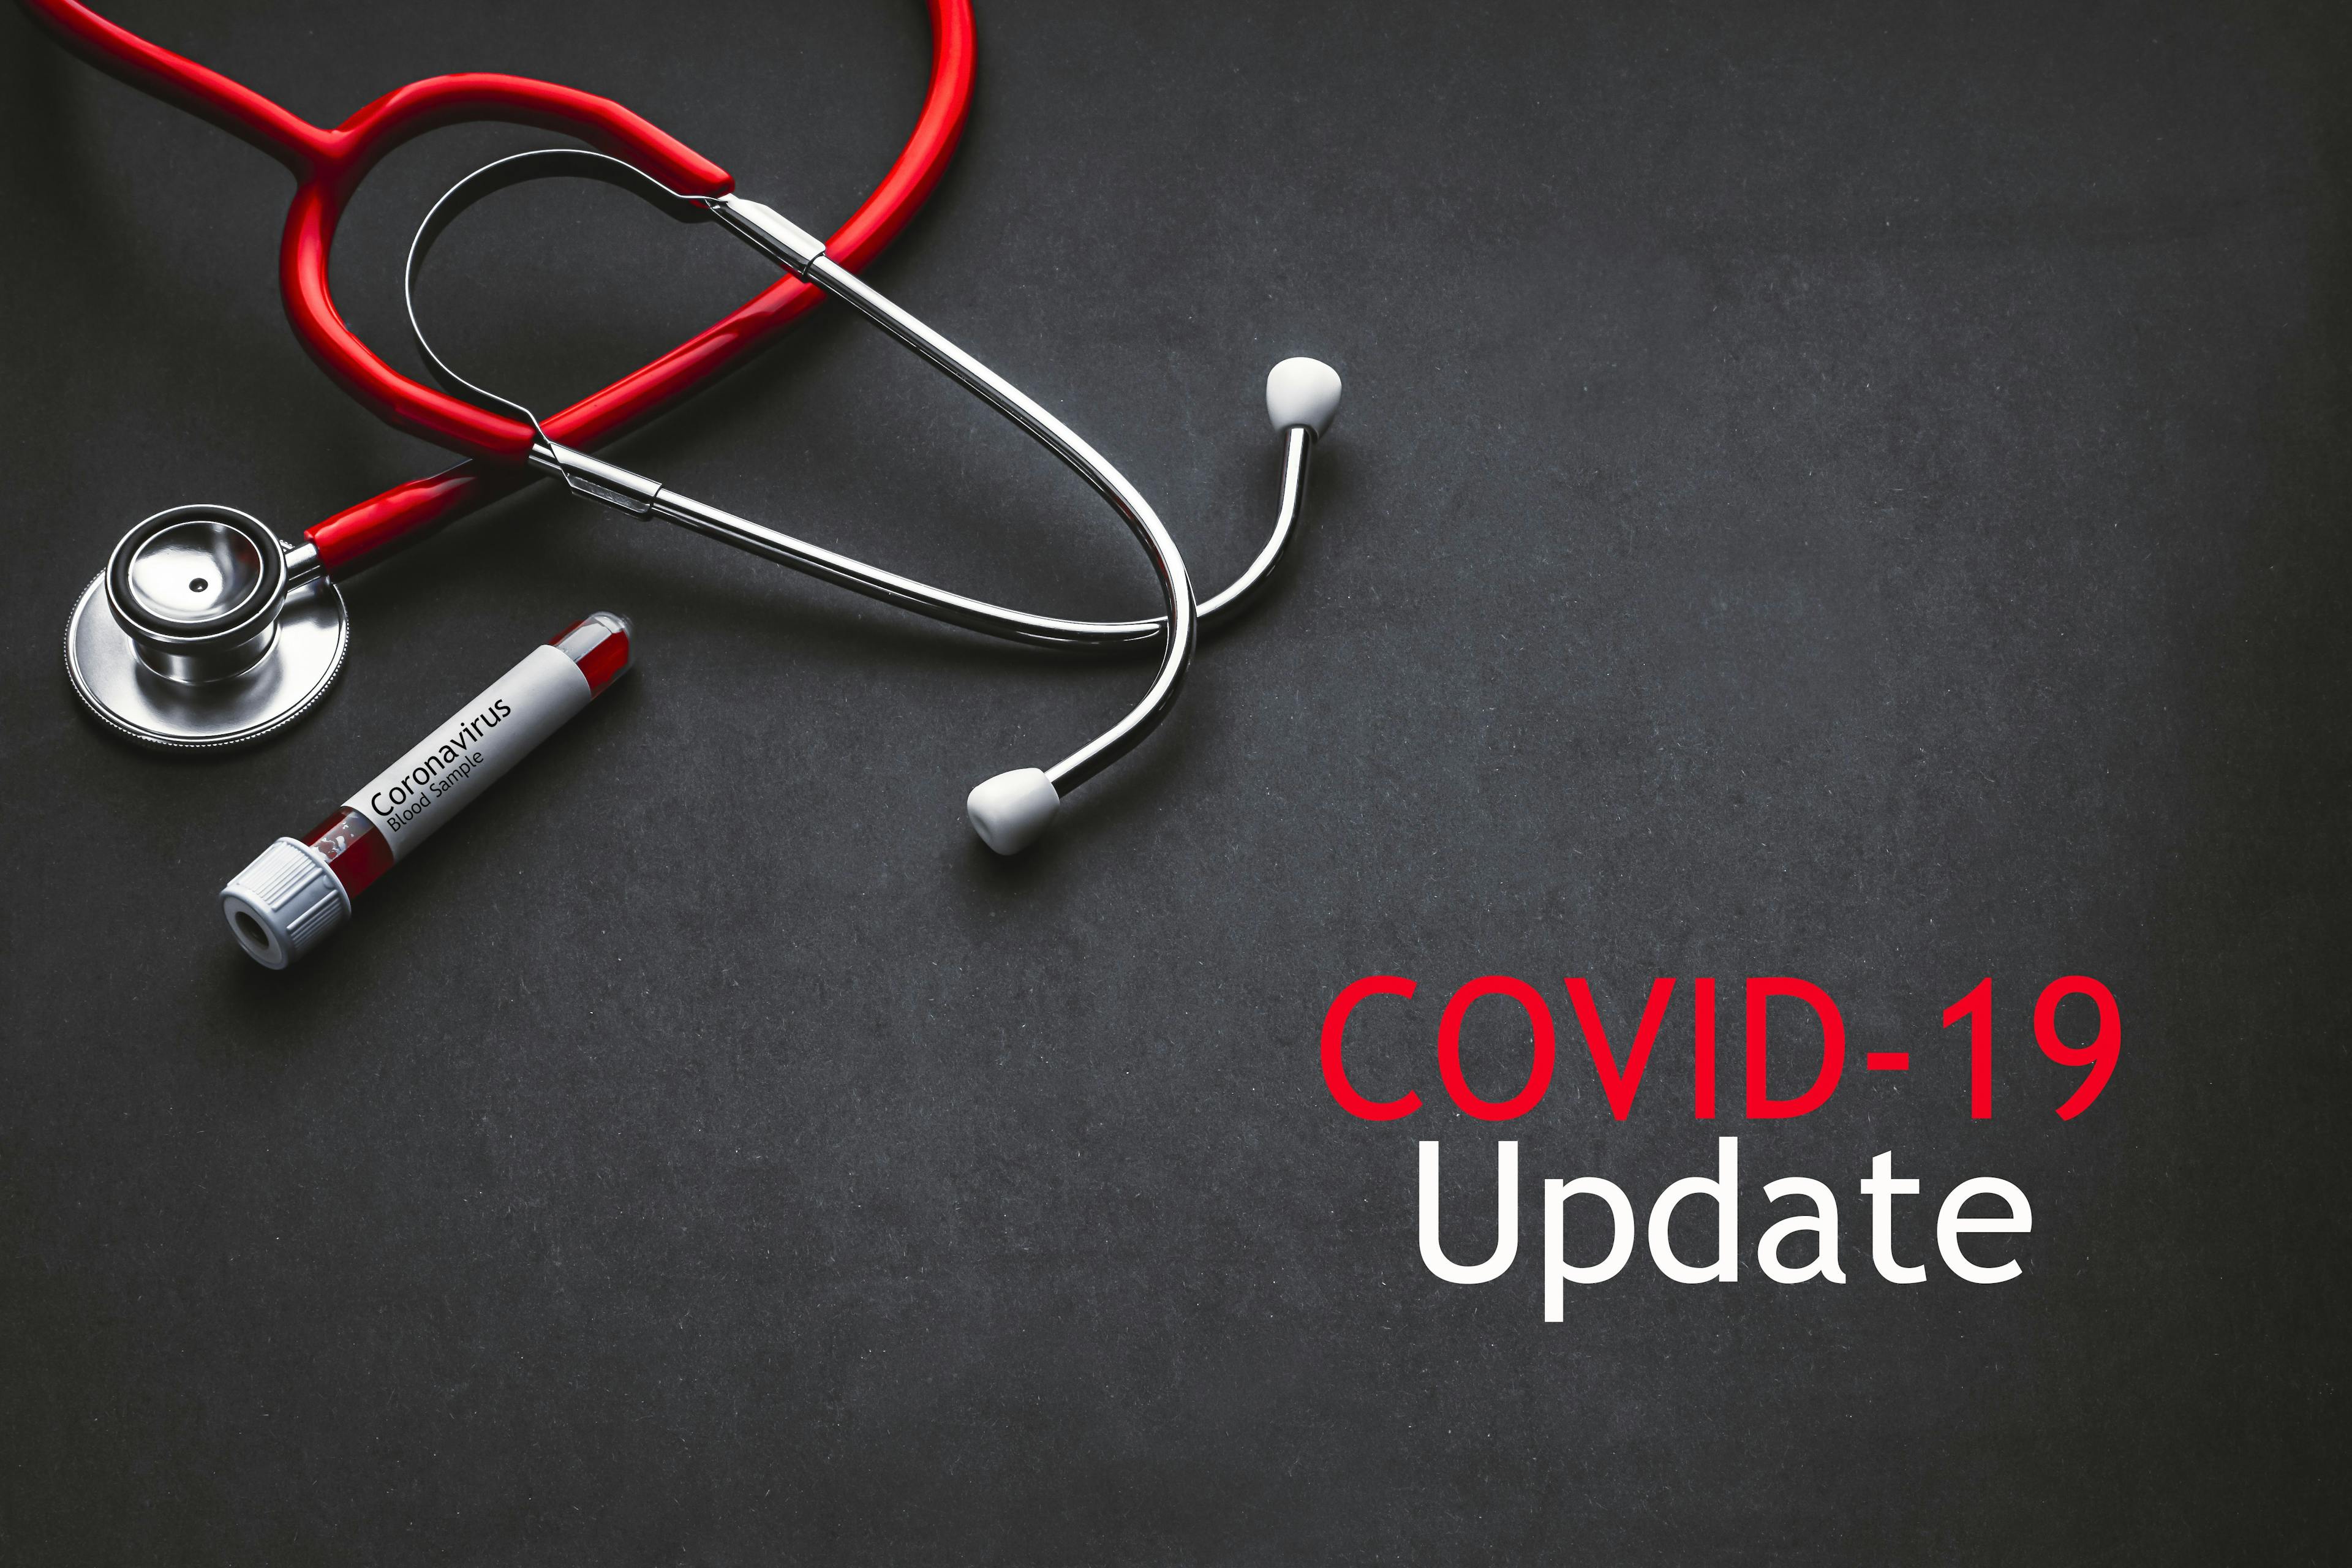 COVID-19 Update: Global Cases and Recoveries as of May 15, 2020